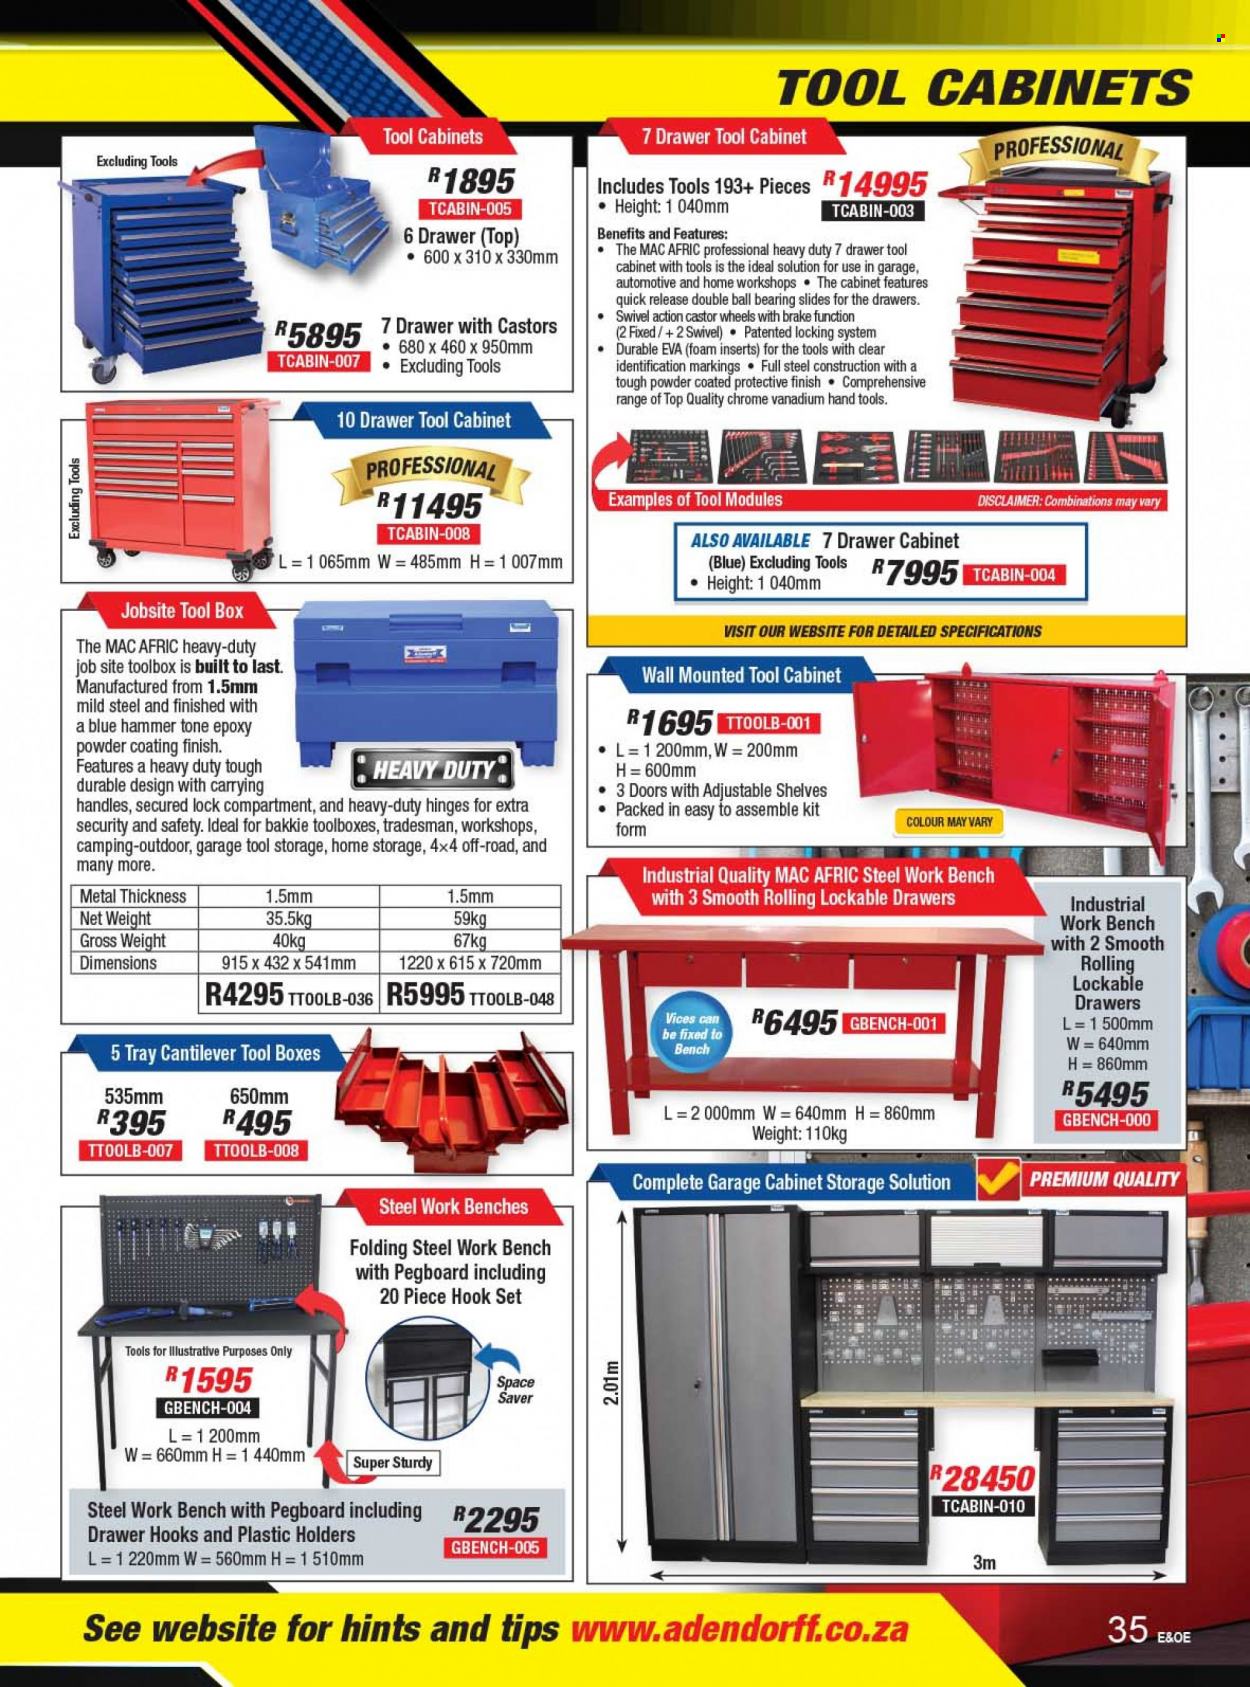 Adendorff Machinery Mart catalogue  - Sales products - tool box, hand tools, cabinet, work bench, tool cabinets. Page 37.